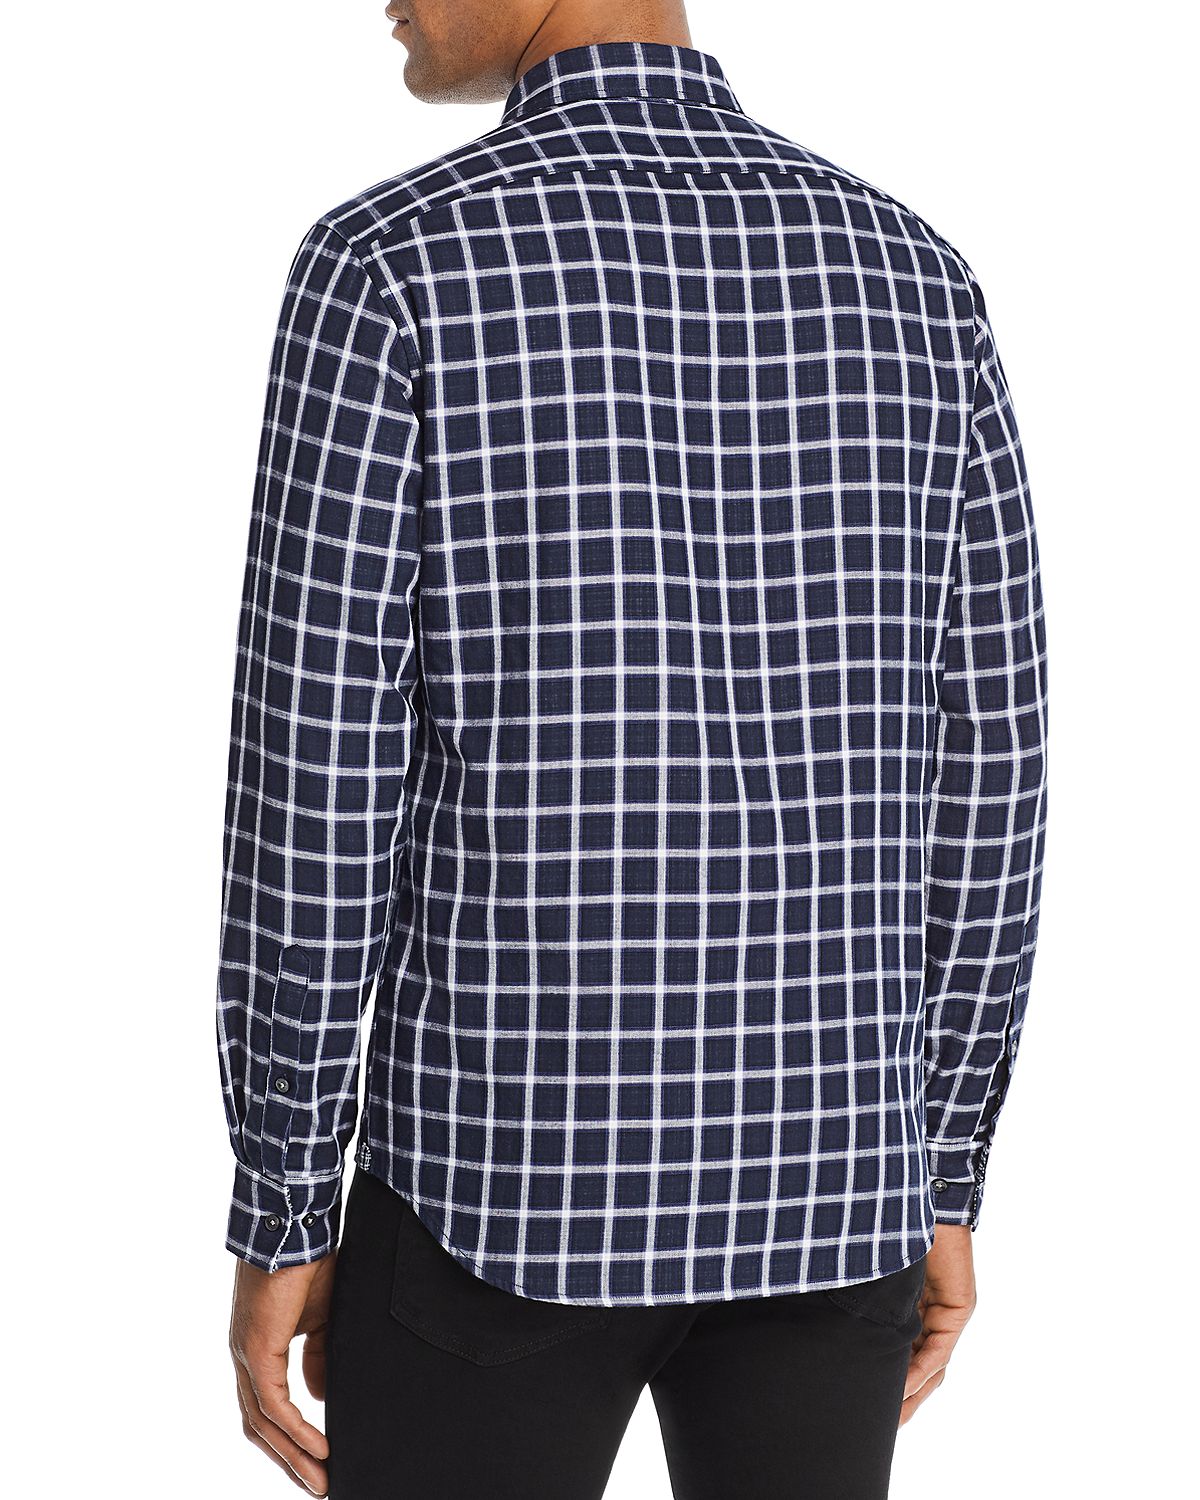 Michael Kors Nate Double-faced Plaid Slim Fit Shirt Midnight